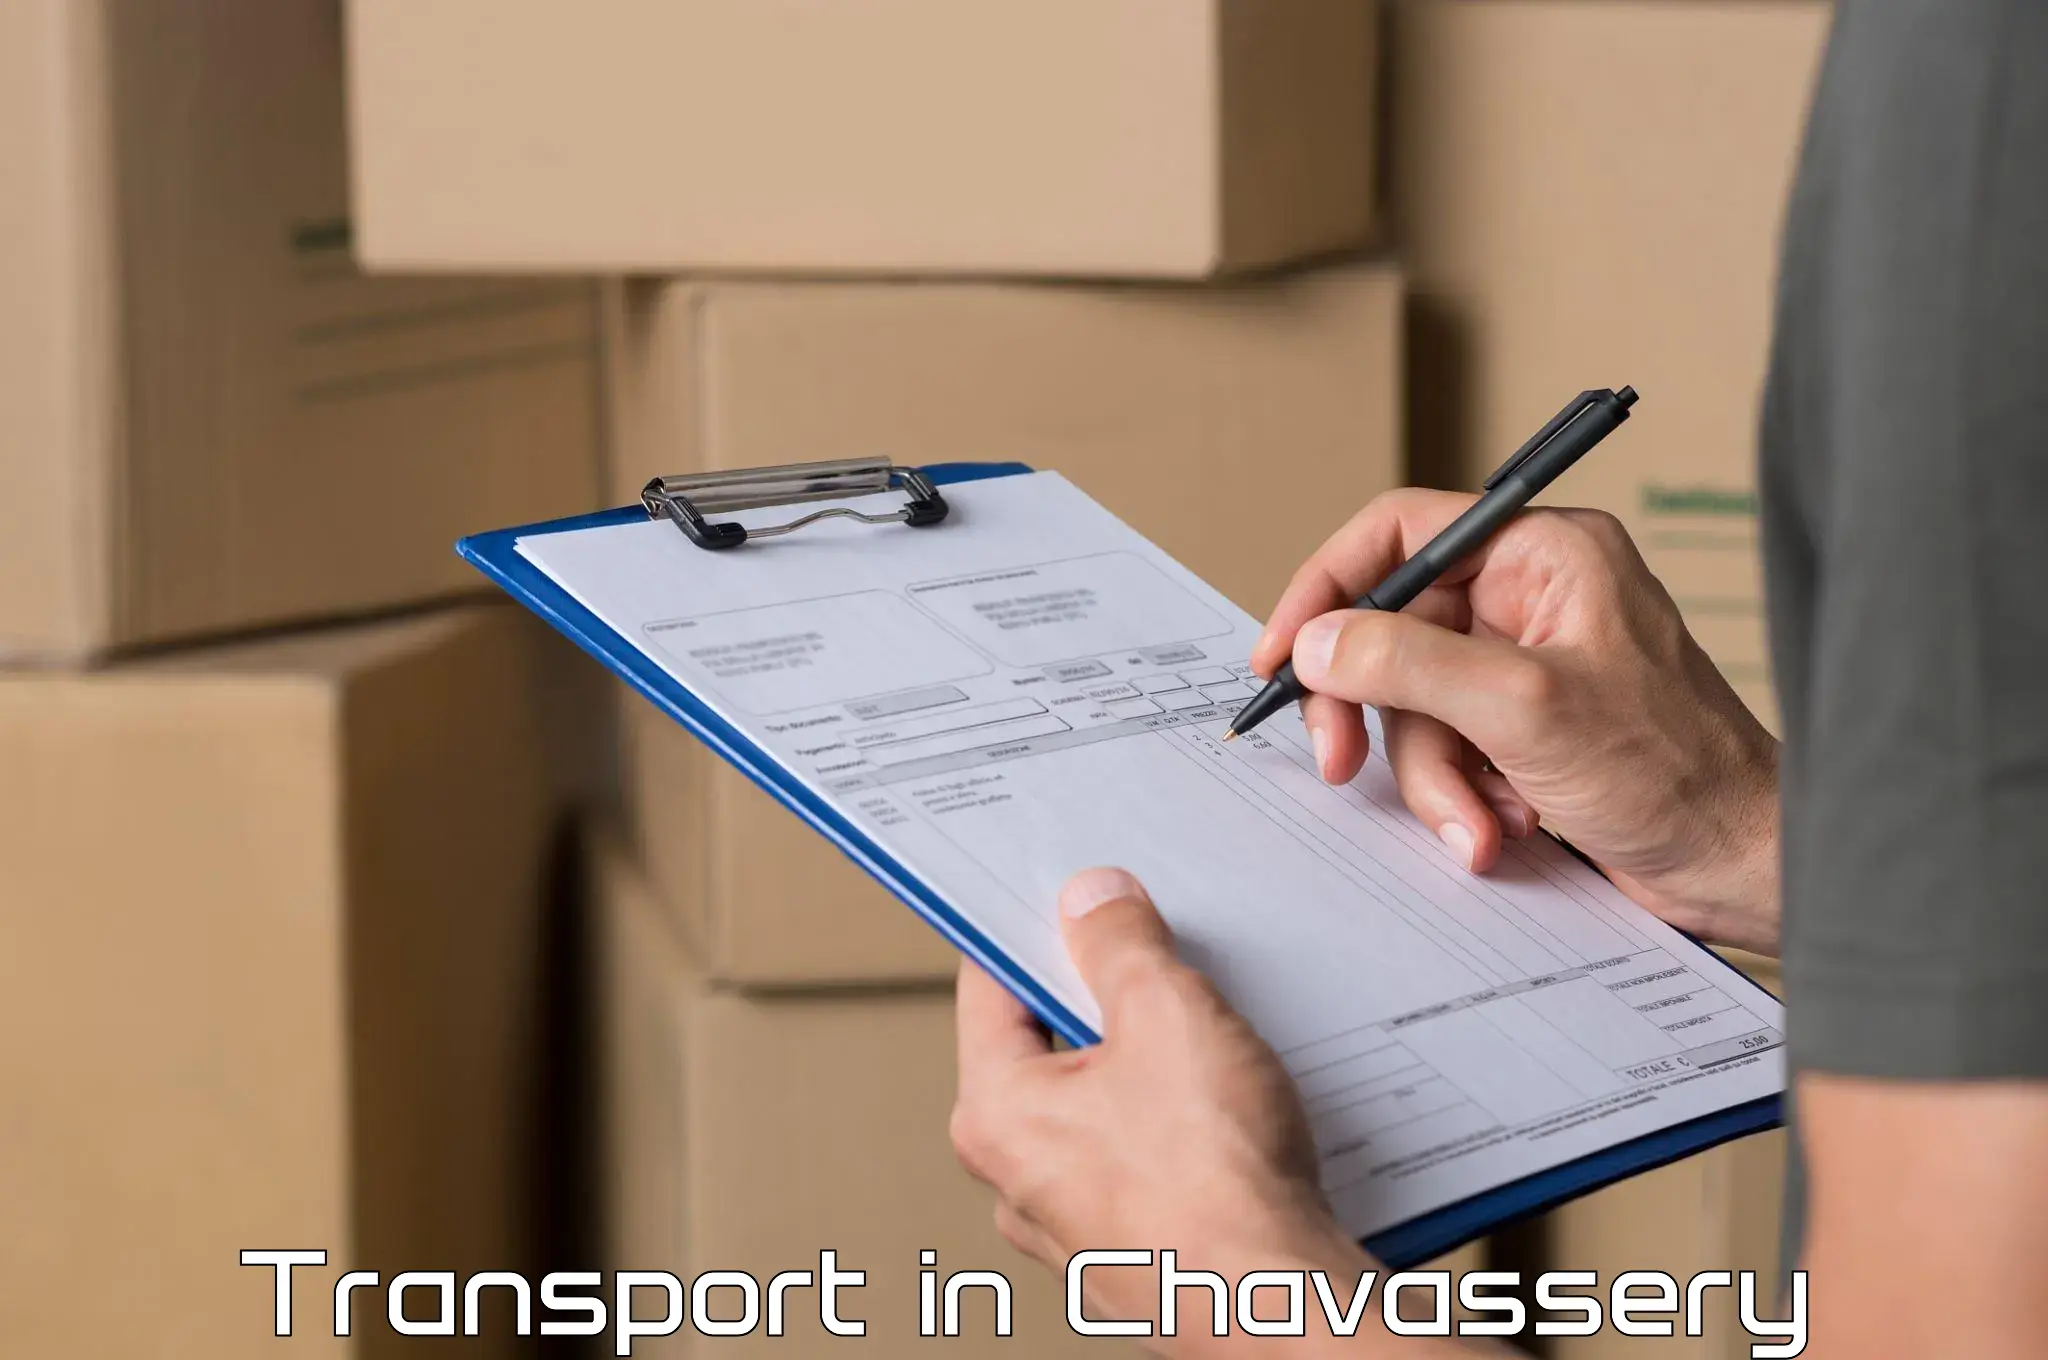 Road transport services in Chavassery